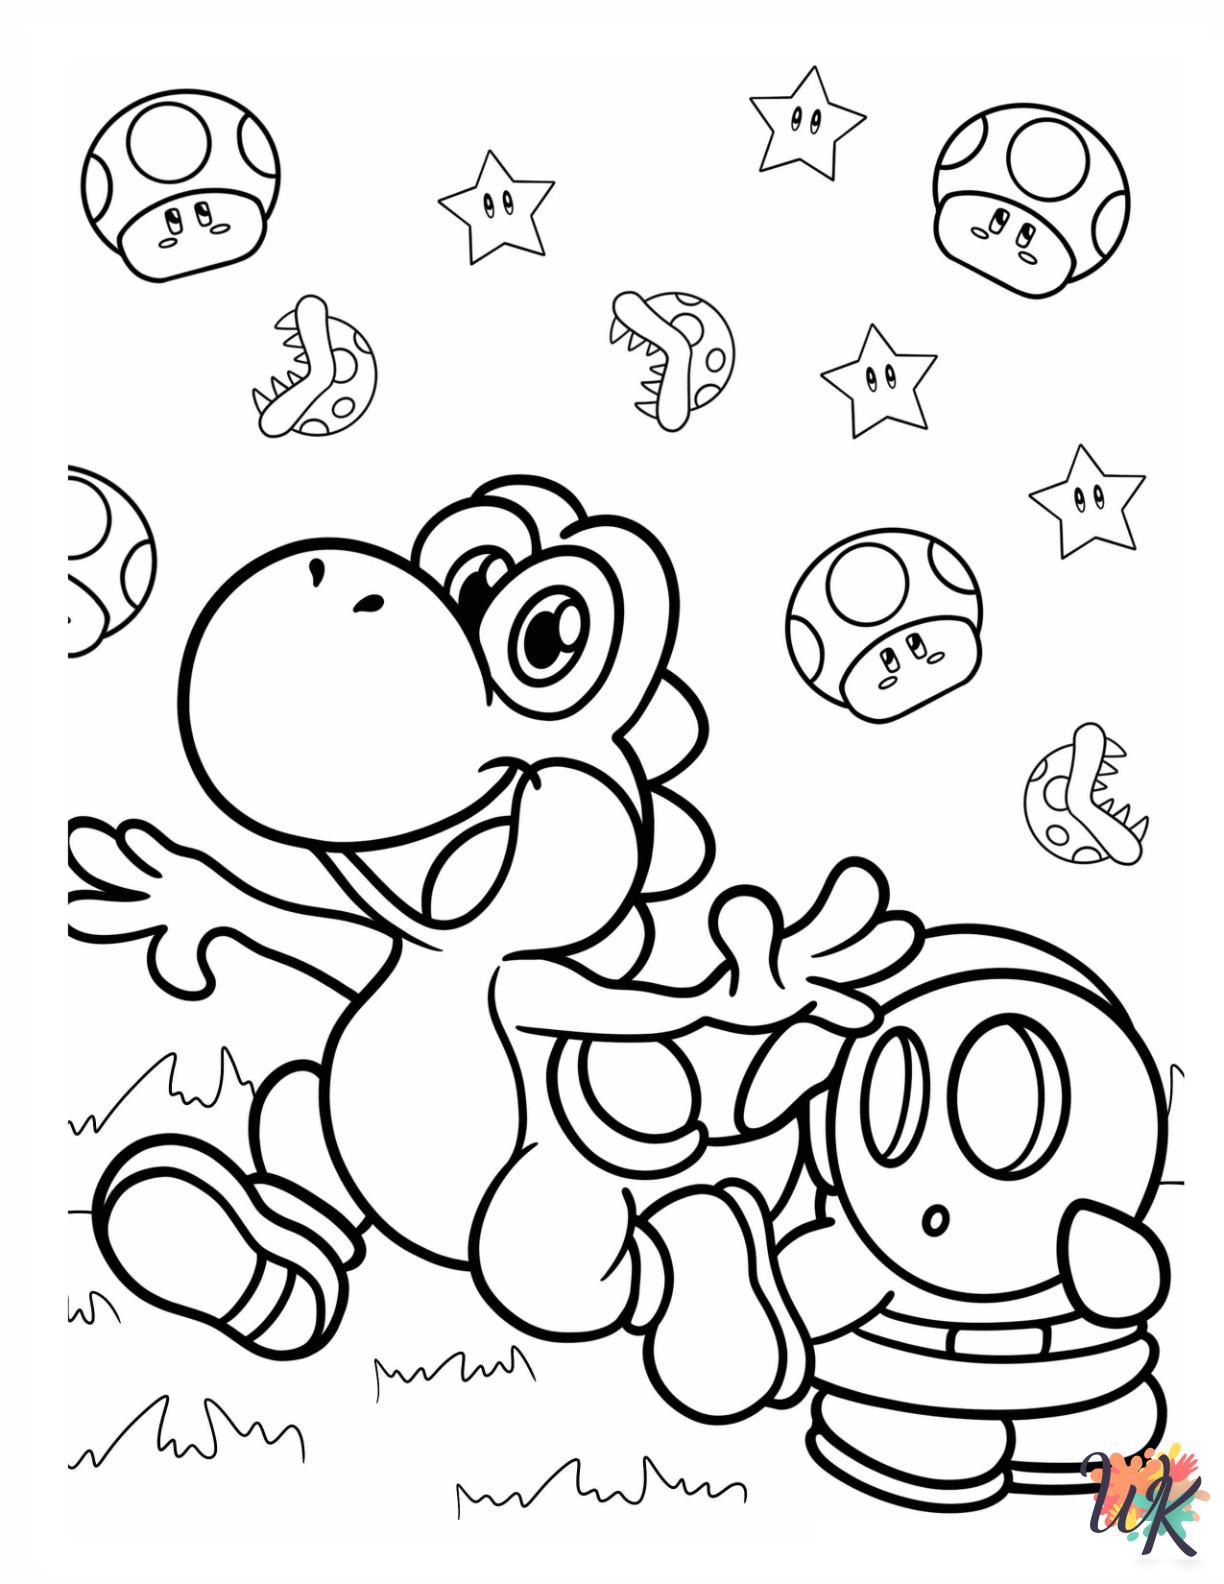 Shy Guy ornament coloring pages